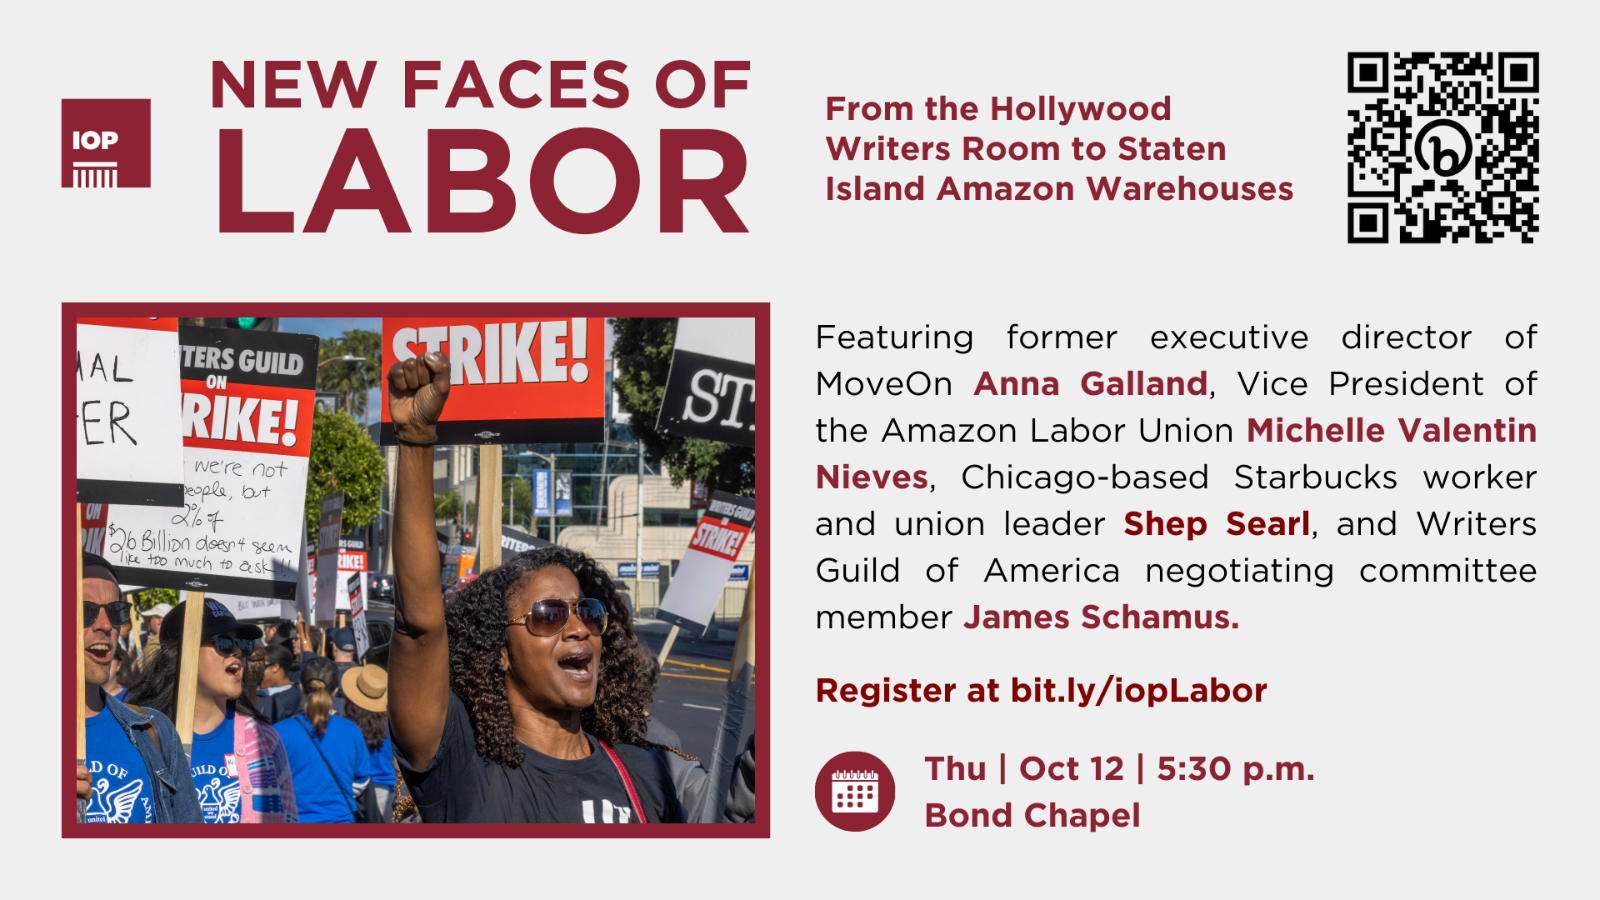 New Faces of Labor: From the Hollywood Writers Room to Staten Island Amazon Warehouses